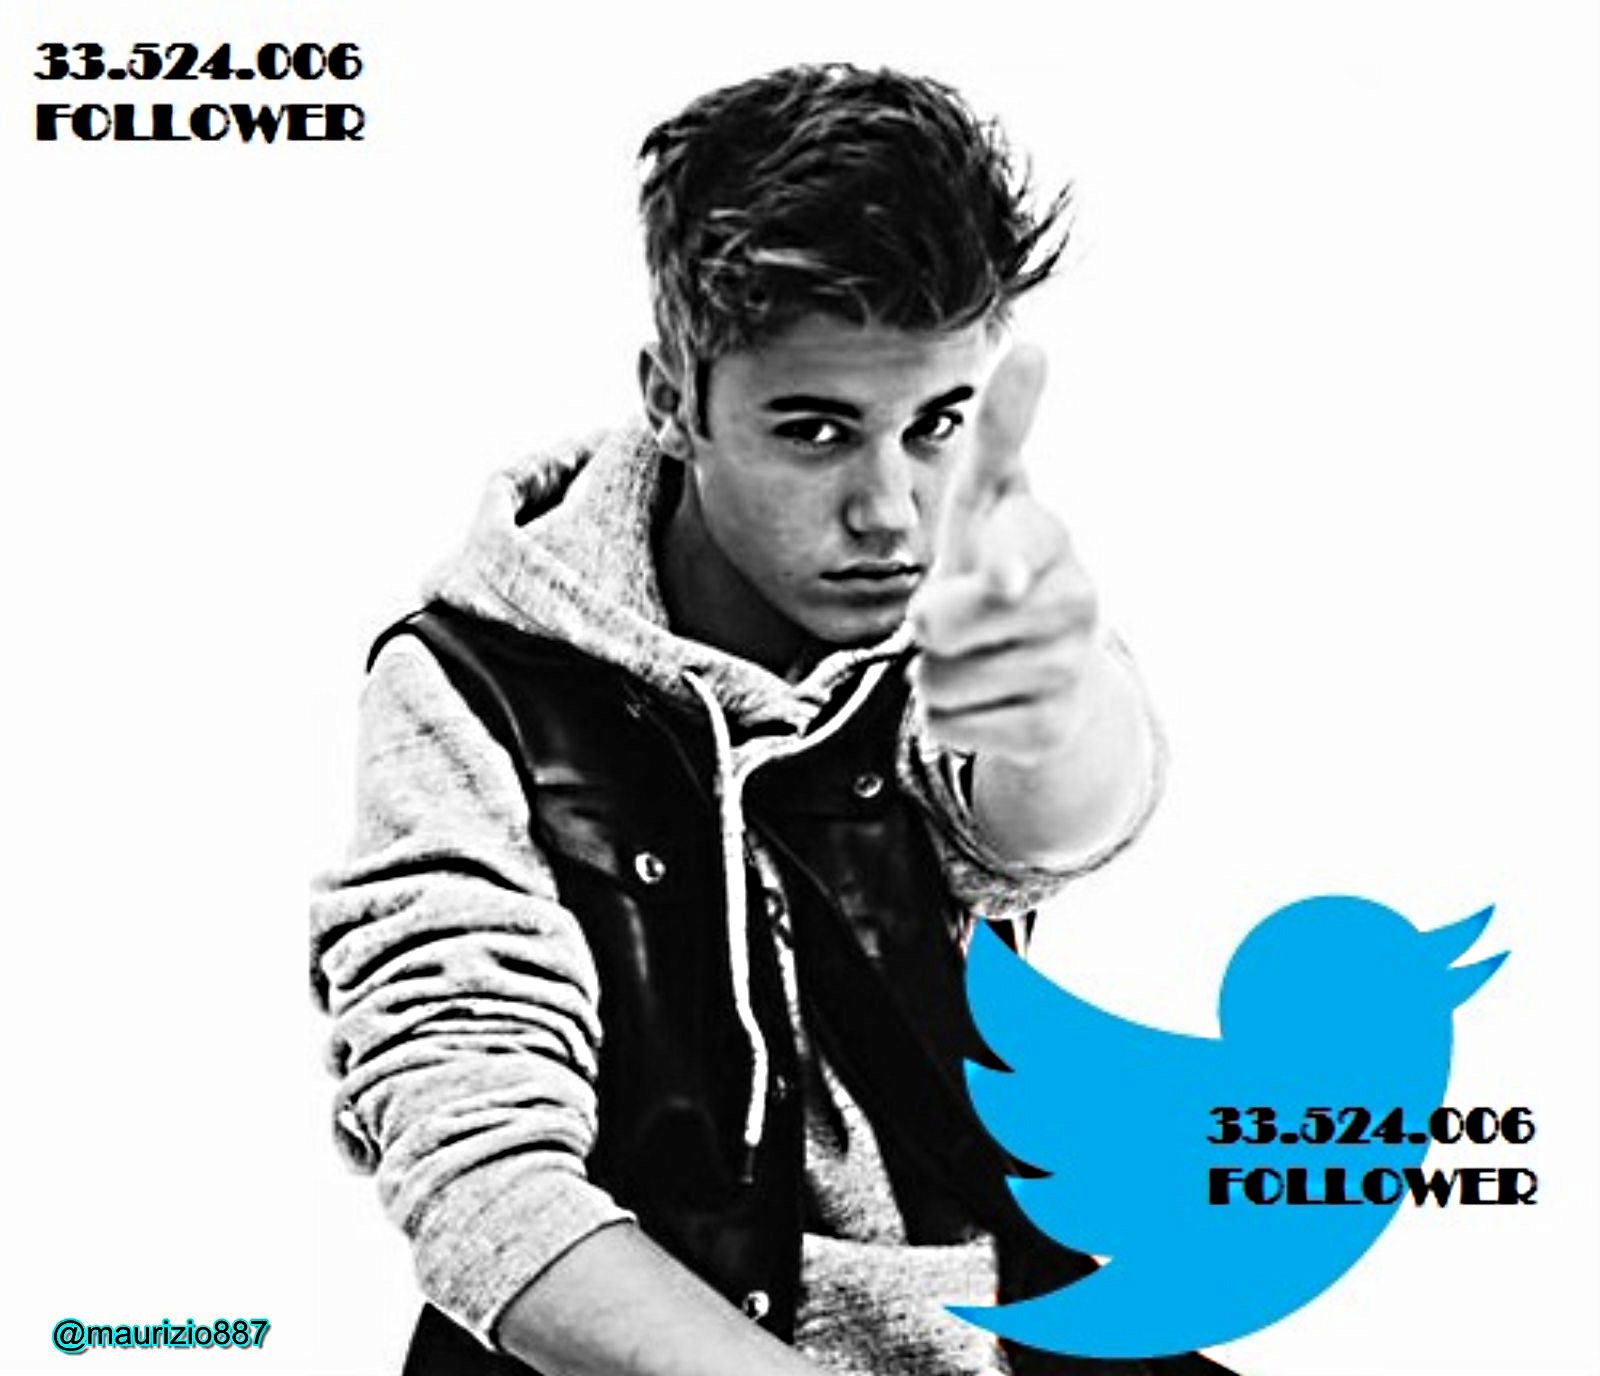 bieber THE Special One on twitter - Justin Bieber Photo (33429968) - Fanpop1600 x 1376